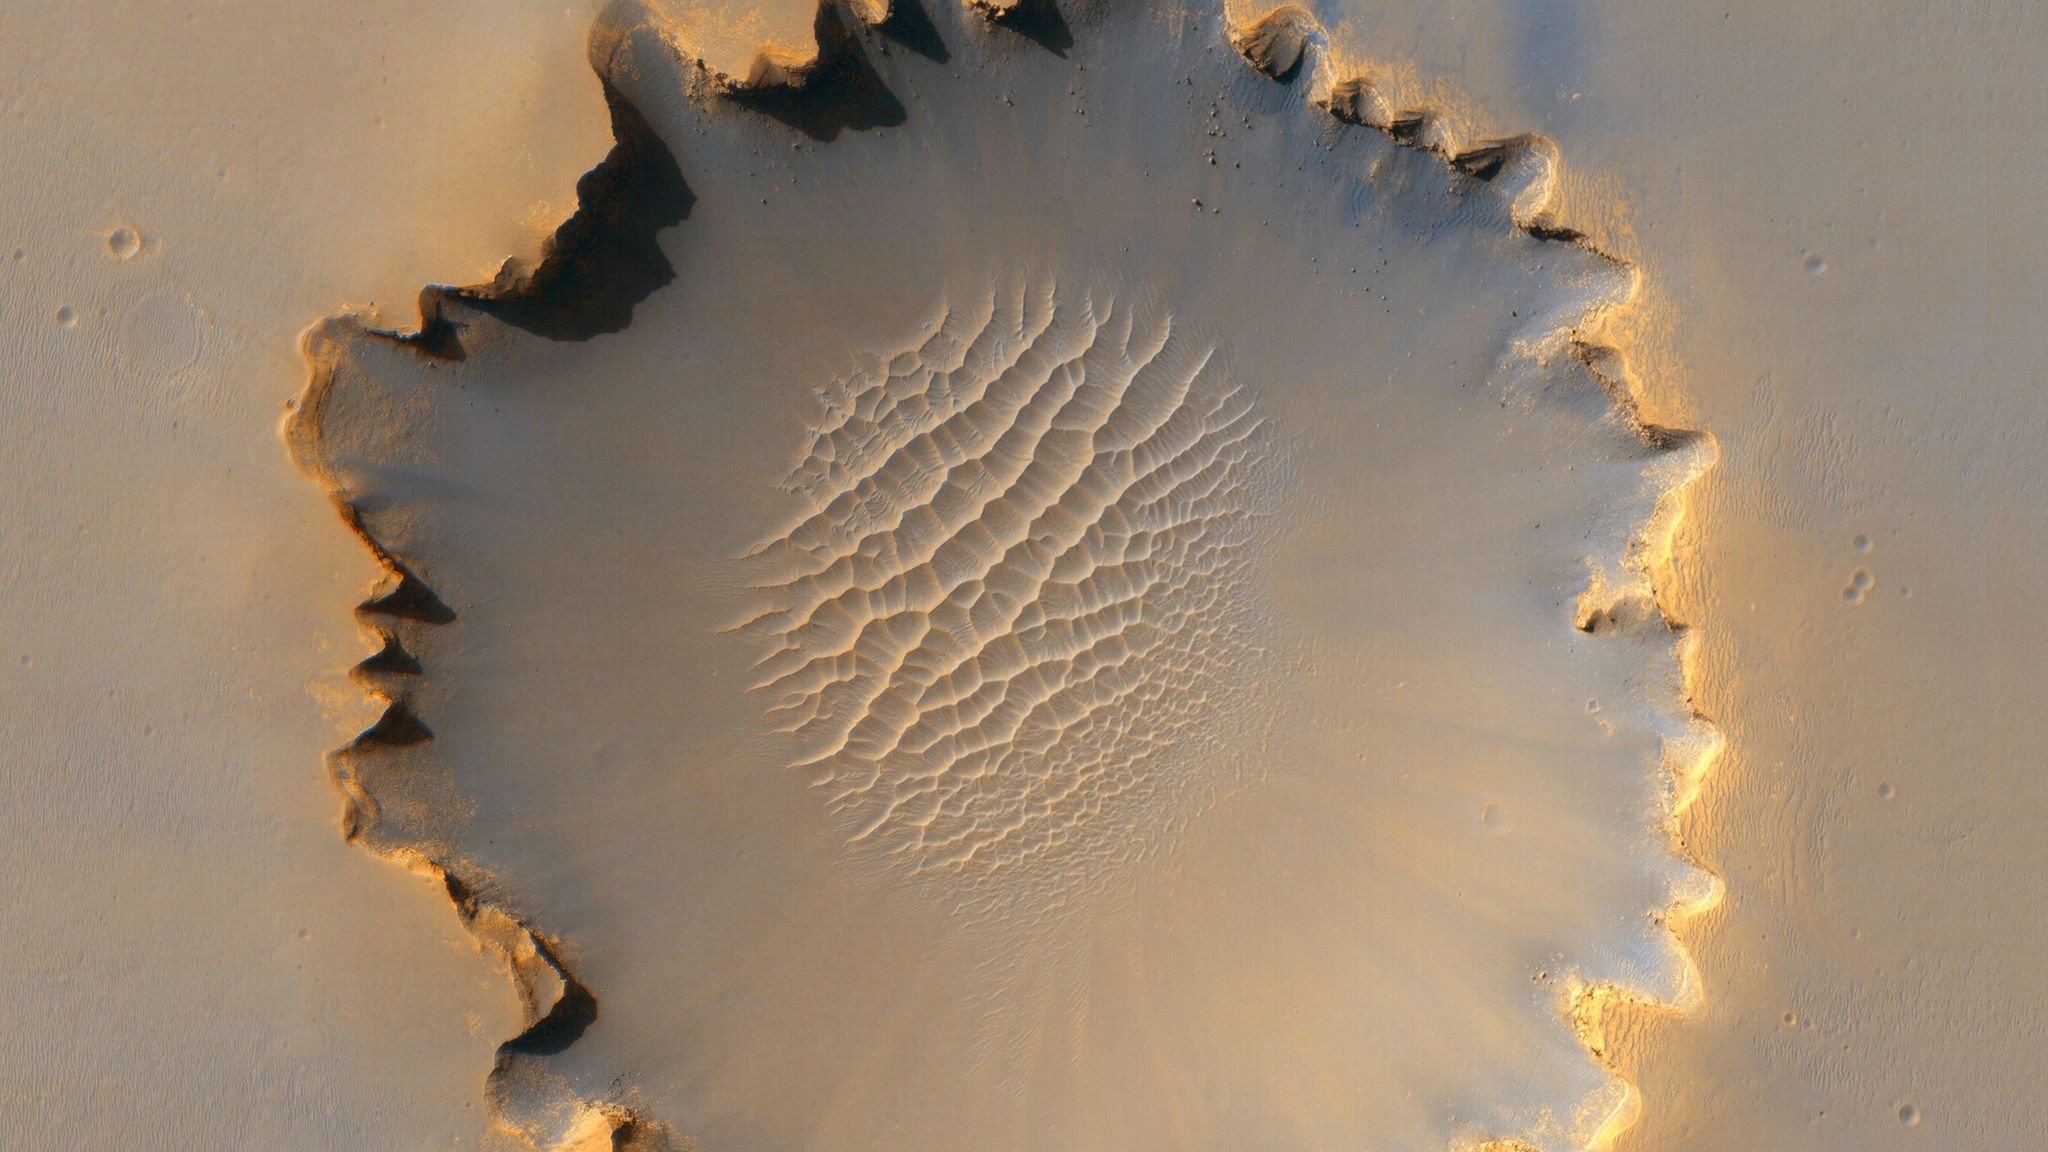 General 2048x1152 Mars planet crater aerial view